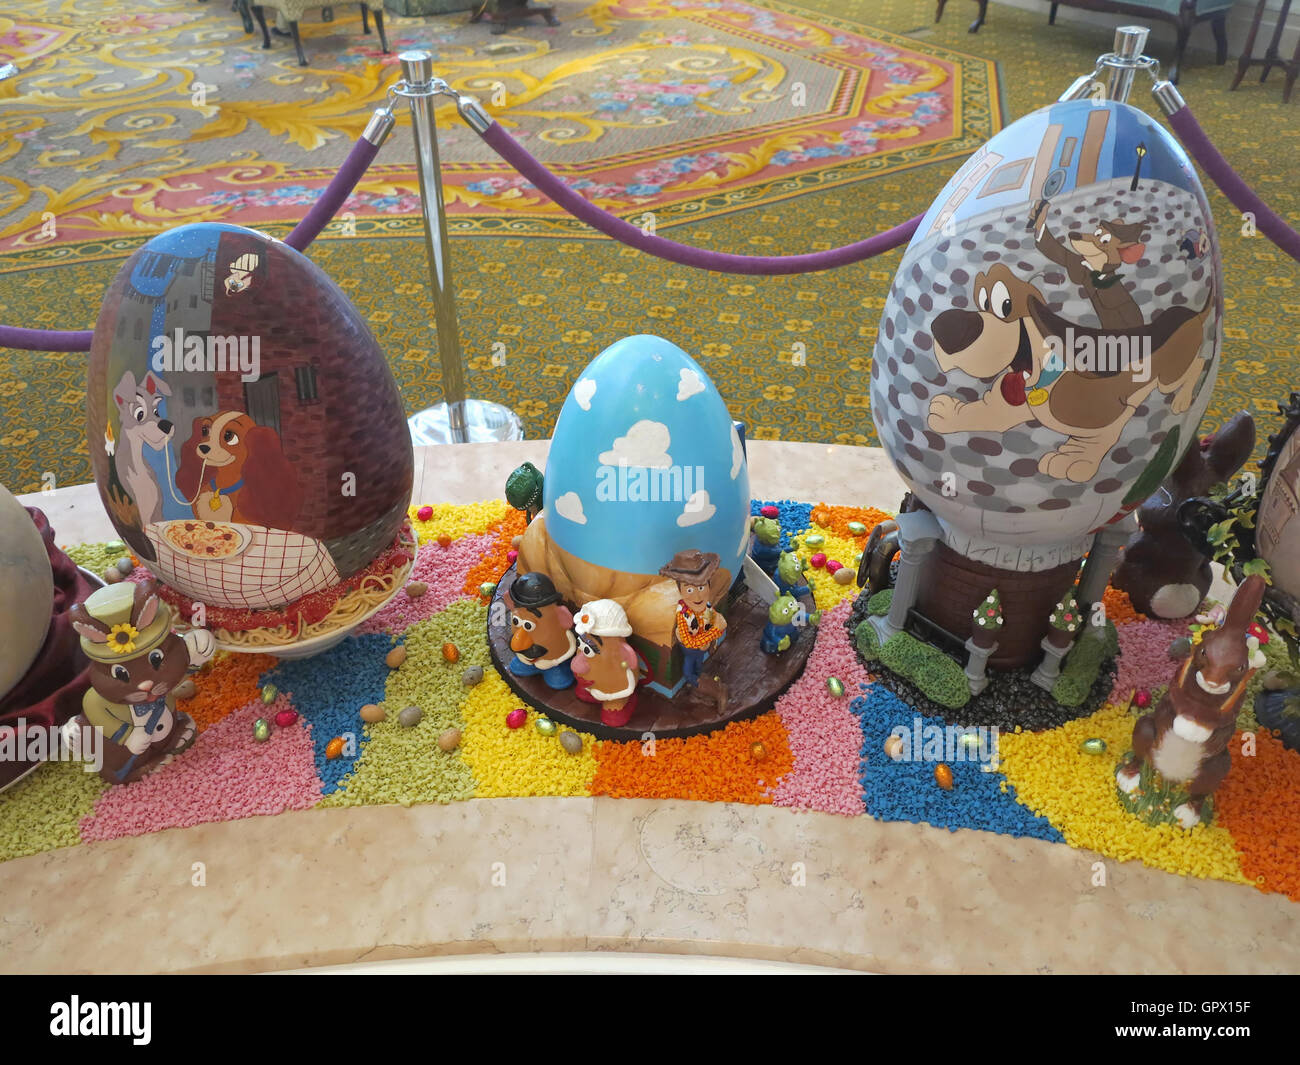 Orlando, Florida. March 22nd, 2015. Easter Eggs from Disney's Grand Floridian Easter Egg Display, all made of chocolate Stock Photo